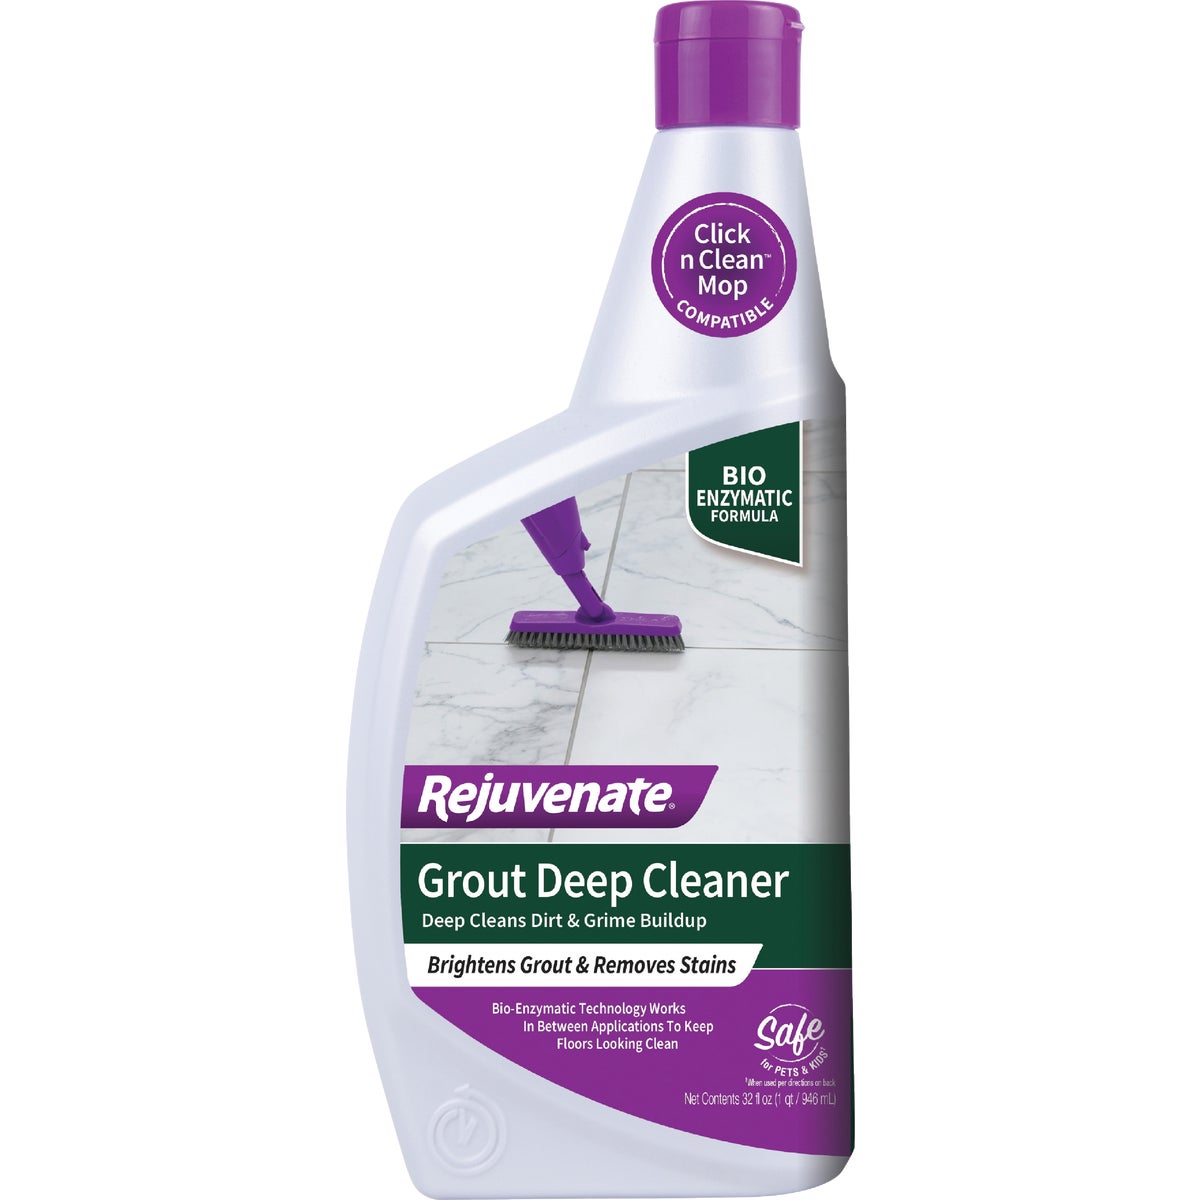 Item 603141, Rejuvenate Grout Deep Cleaner is the best way to clean grout and instantly 